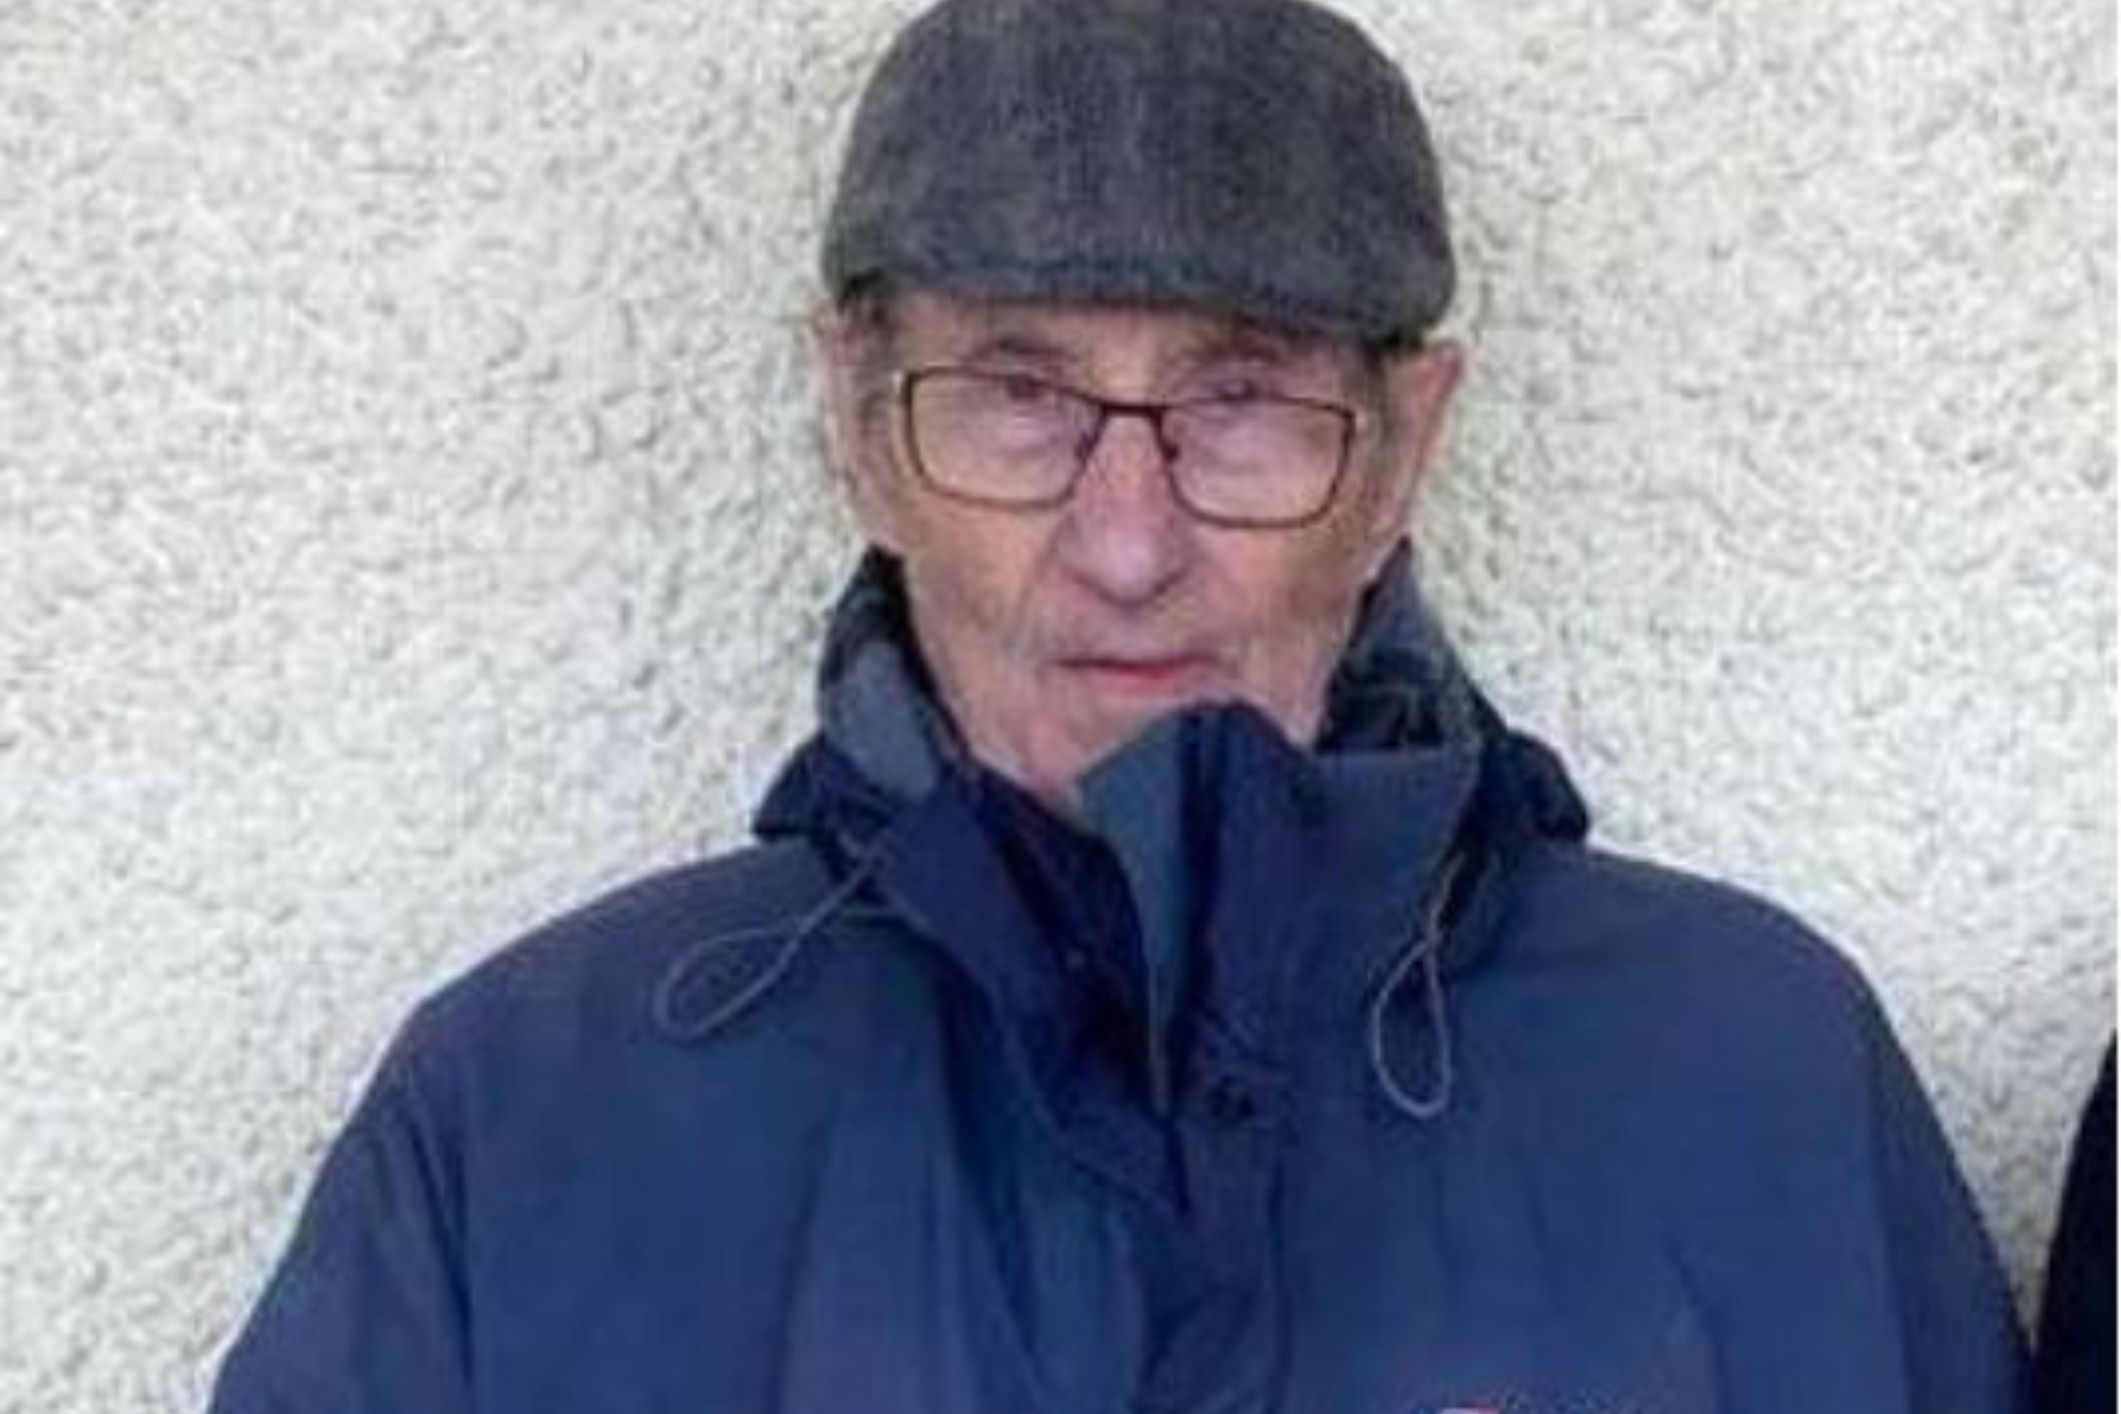 A missing 85-year-old man has been found alive and well after spending 30 hours in a ditch, thanks to a driven policewoman who spent her day off looking for him.